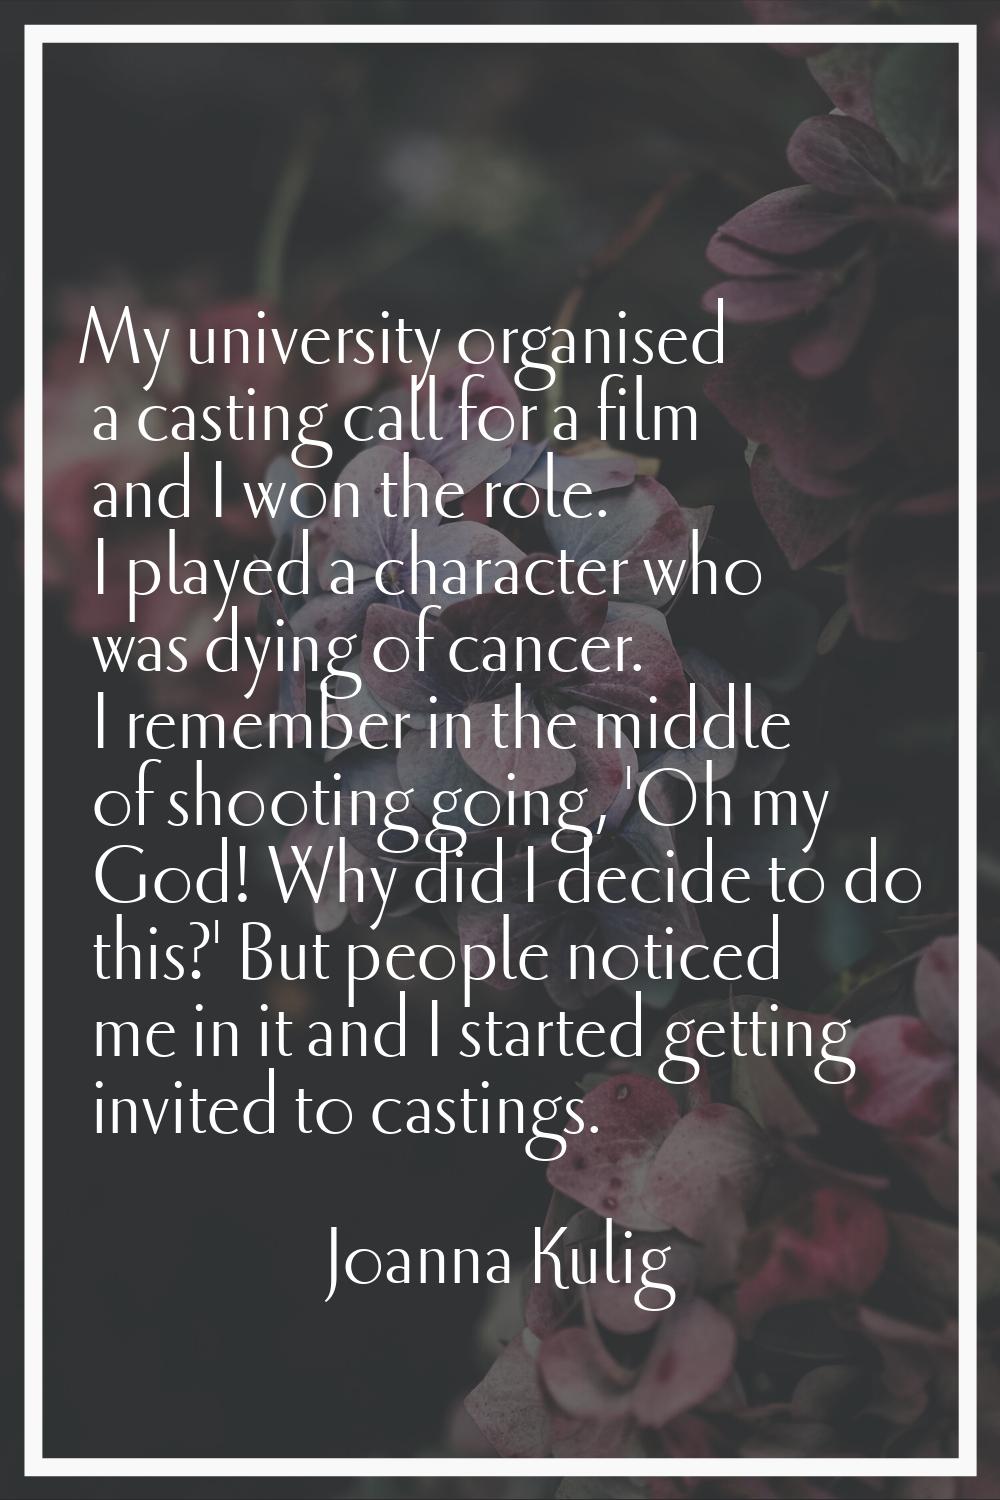 My university organised a casting call for a film and I won the role. I played a character who was 